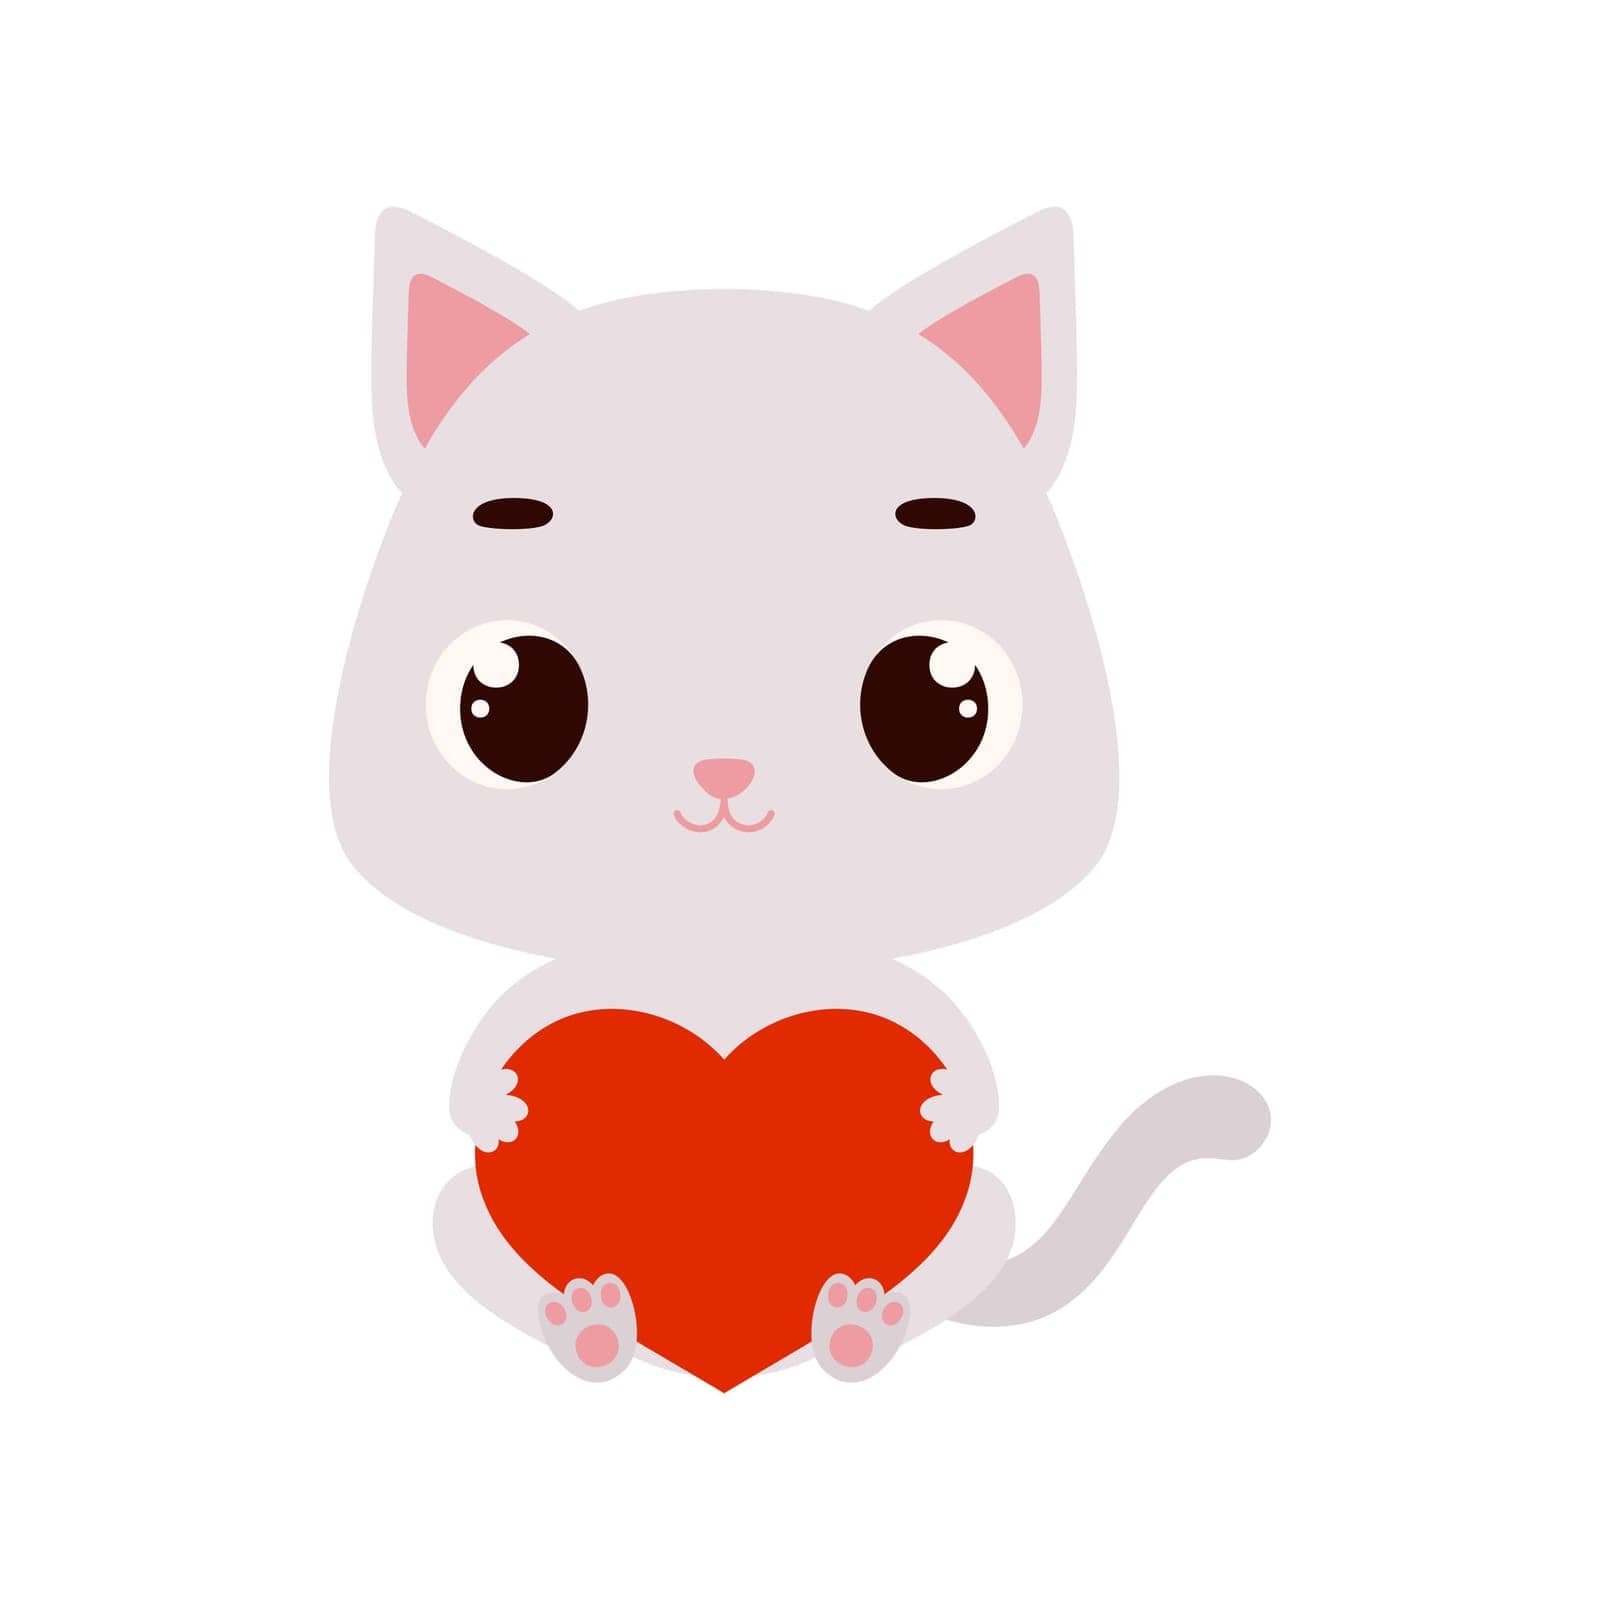 Cute little sitting cat holds heart. Cartoon animal character for kids cards, baby shower, invitation, poster, t-shirt composition, house interior. Vector stock illustration by Melnyk